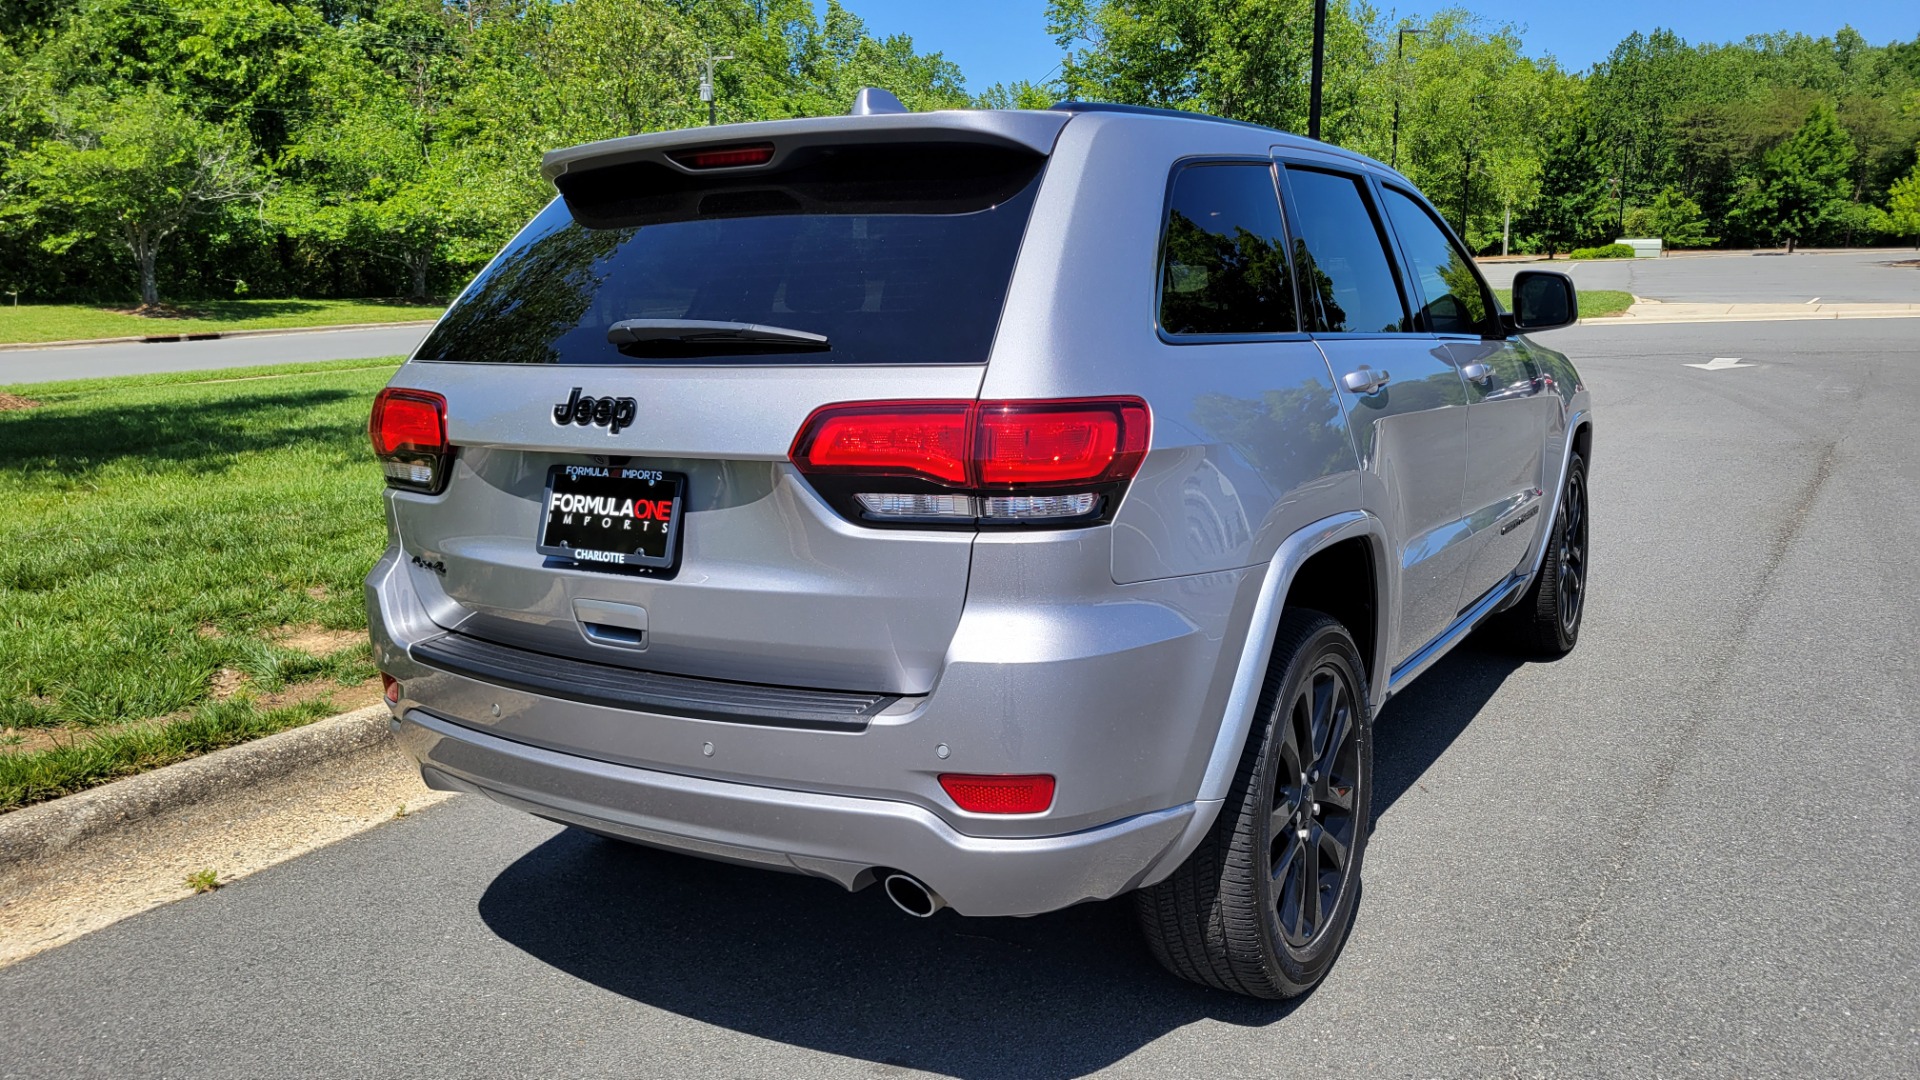 Used 2021 Jeep GRAND CHEROKEE LAREDO X / 3.6L / 4X4 / NAV / ALTITUDE PKG / LEATHER / REARVIEW for sale $39,995 at Formula Imports in Charlotte NC 28227 9